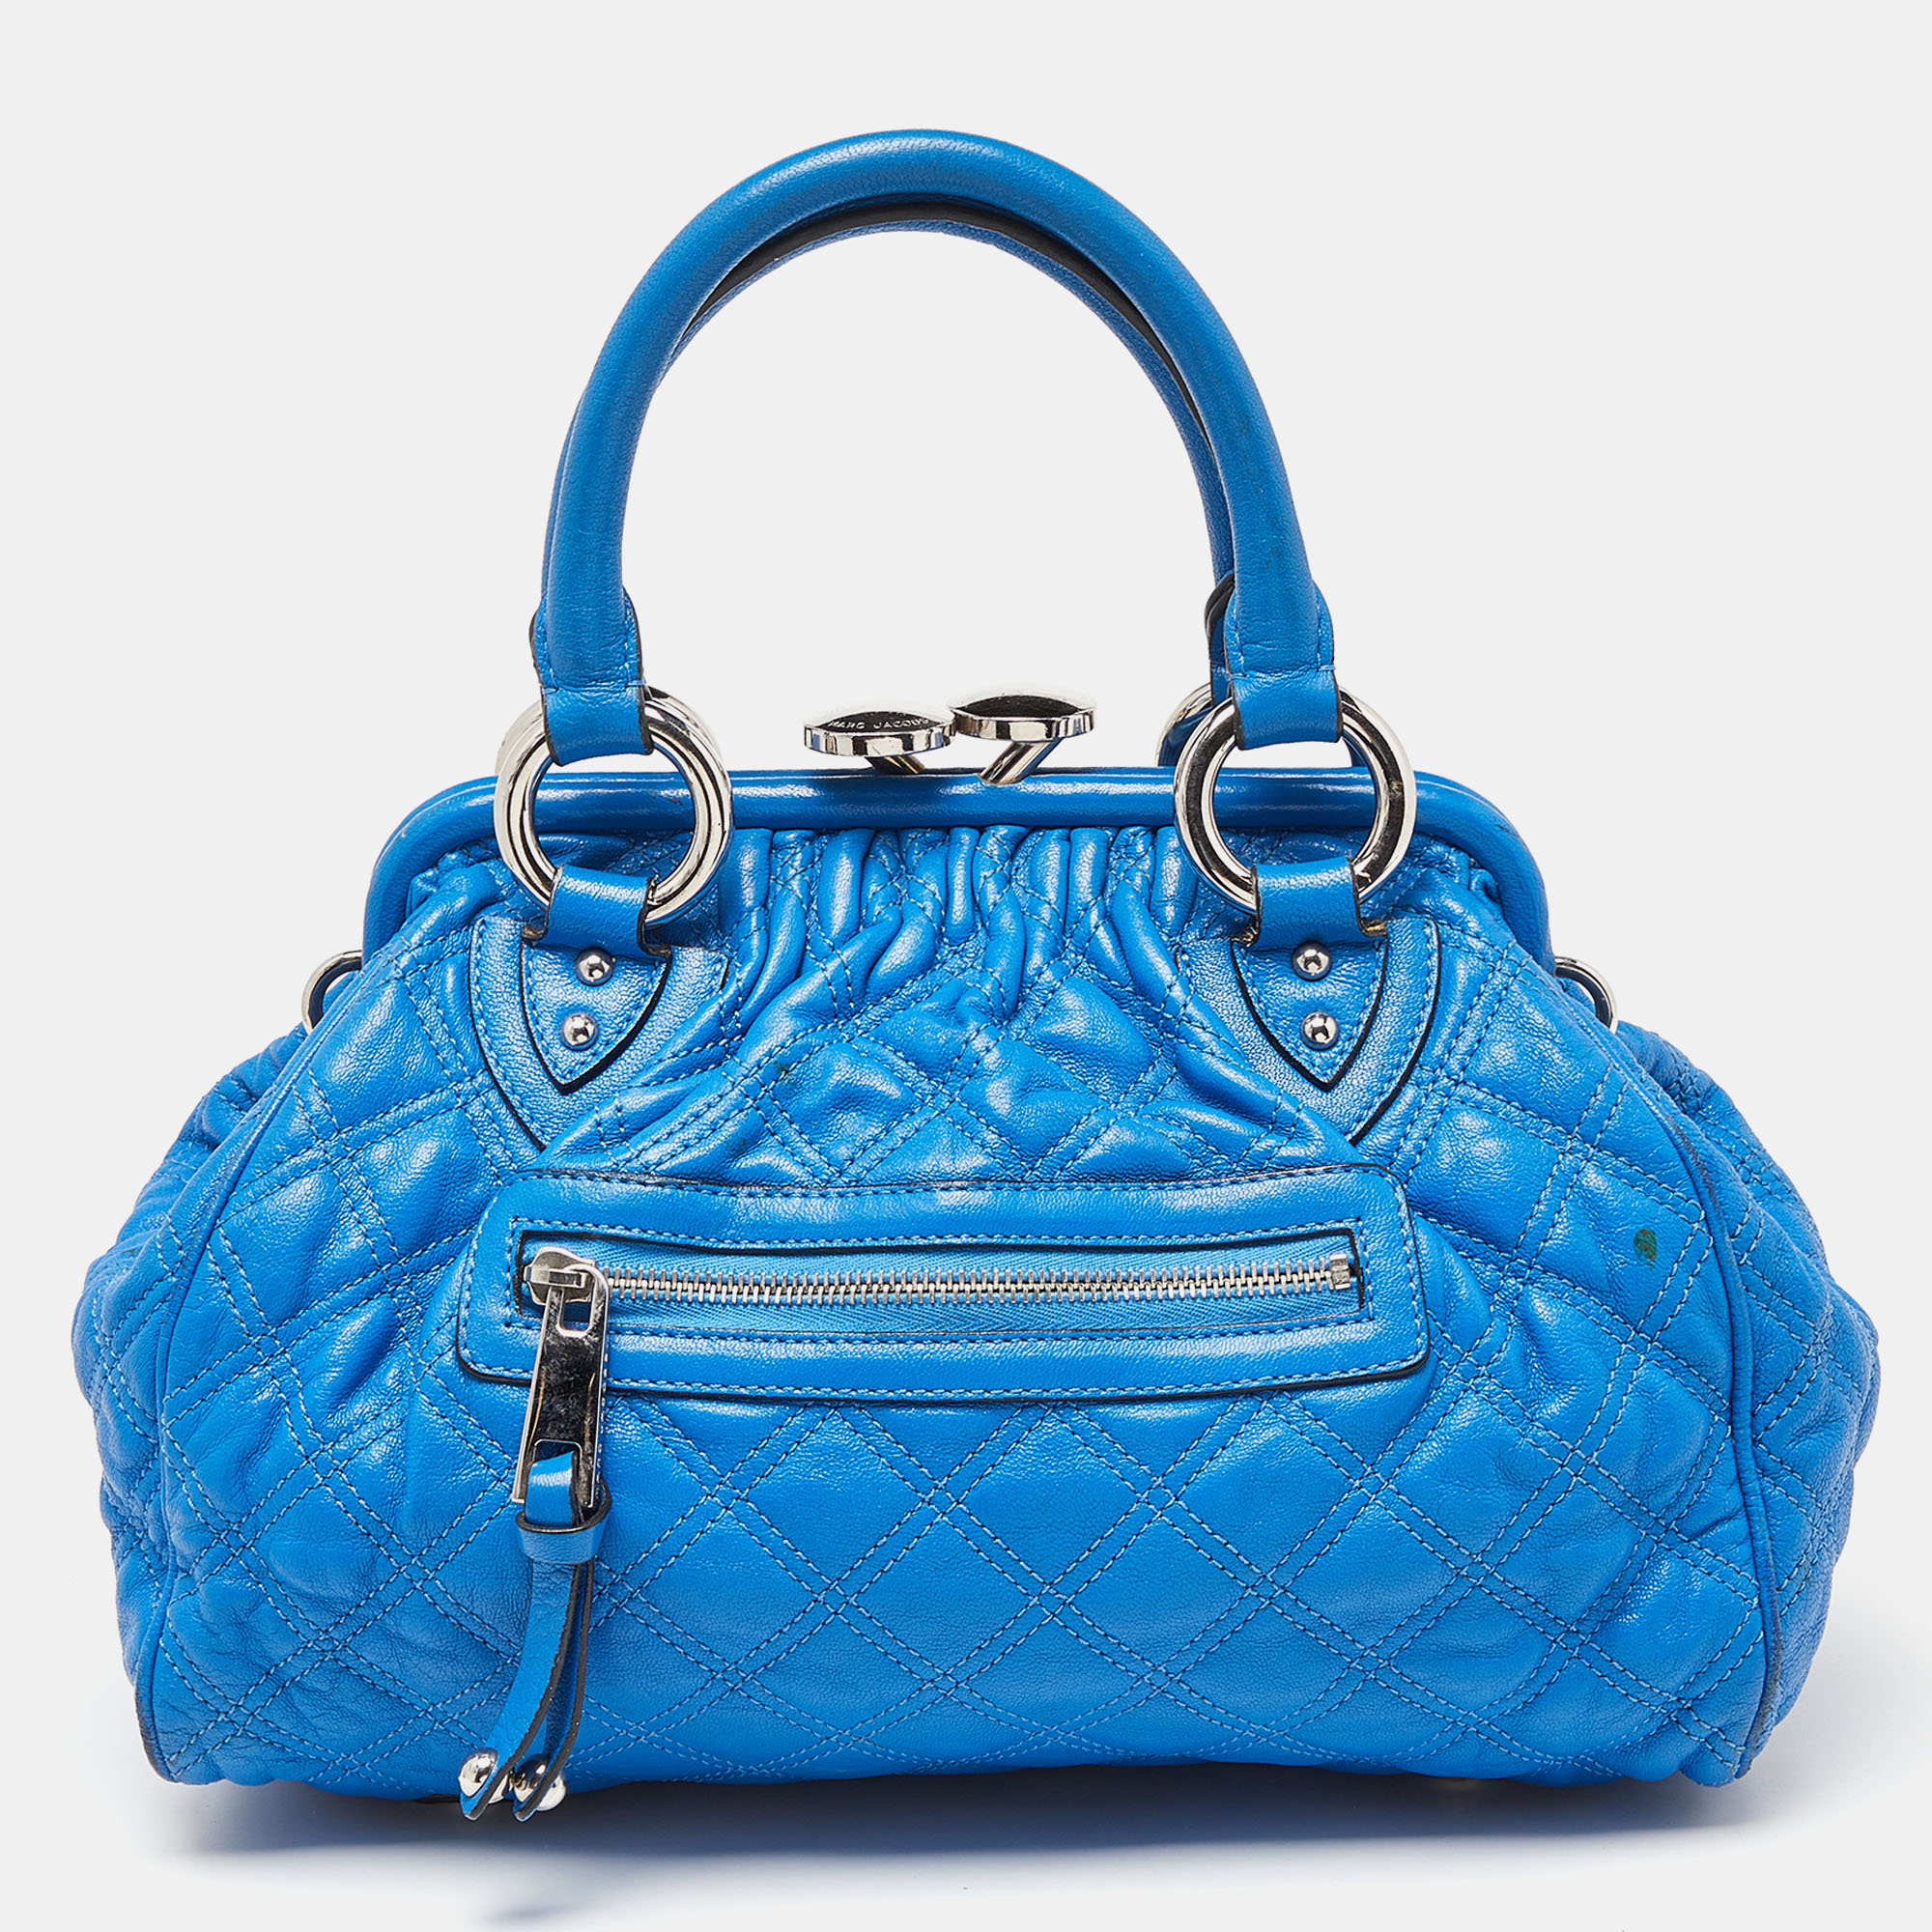 Pre-owned Marc Jacobs Blue Leather Mini Stam Satchel